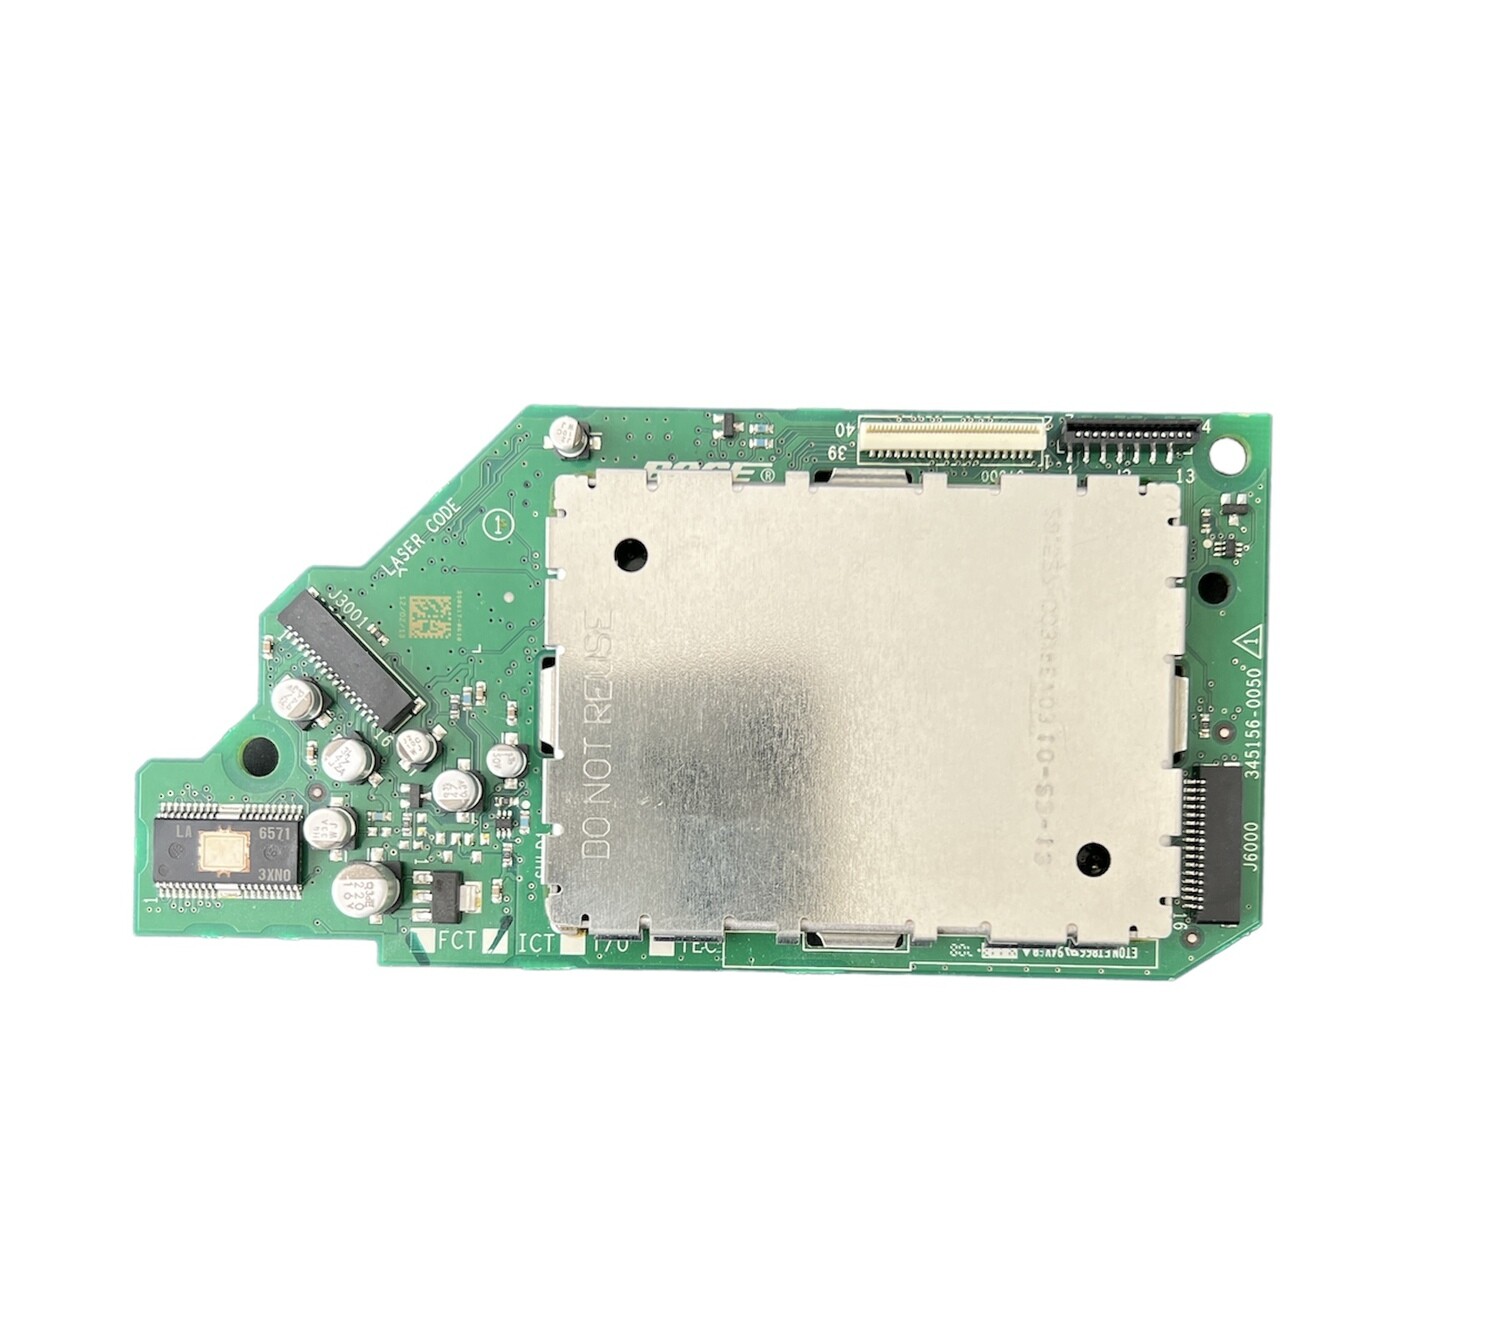 Replacement CD Processor PCB 345156-0050 for Bose Wave Music System IV